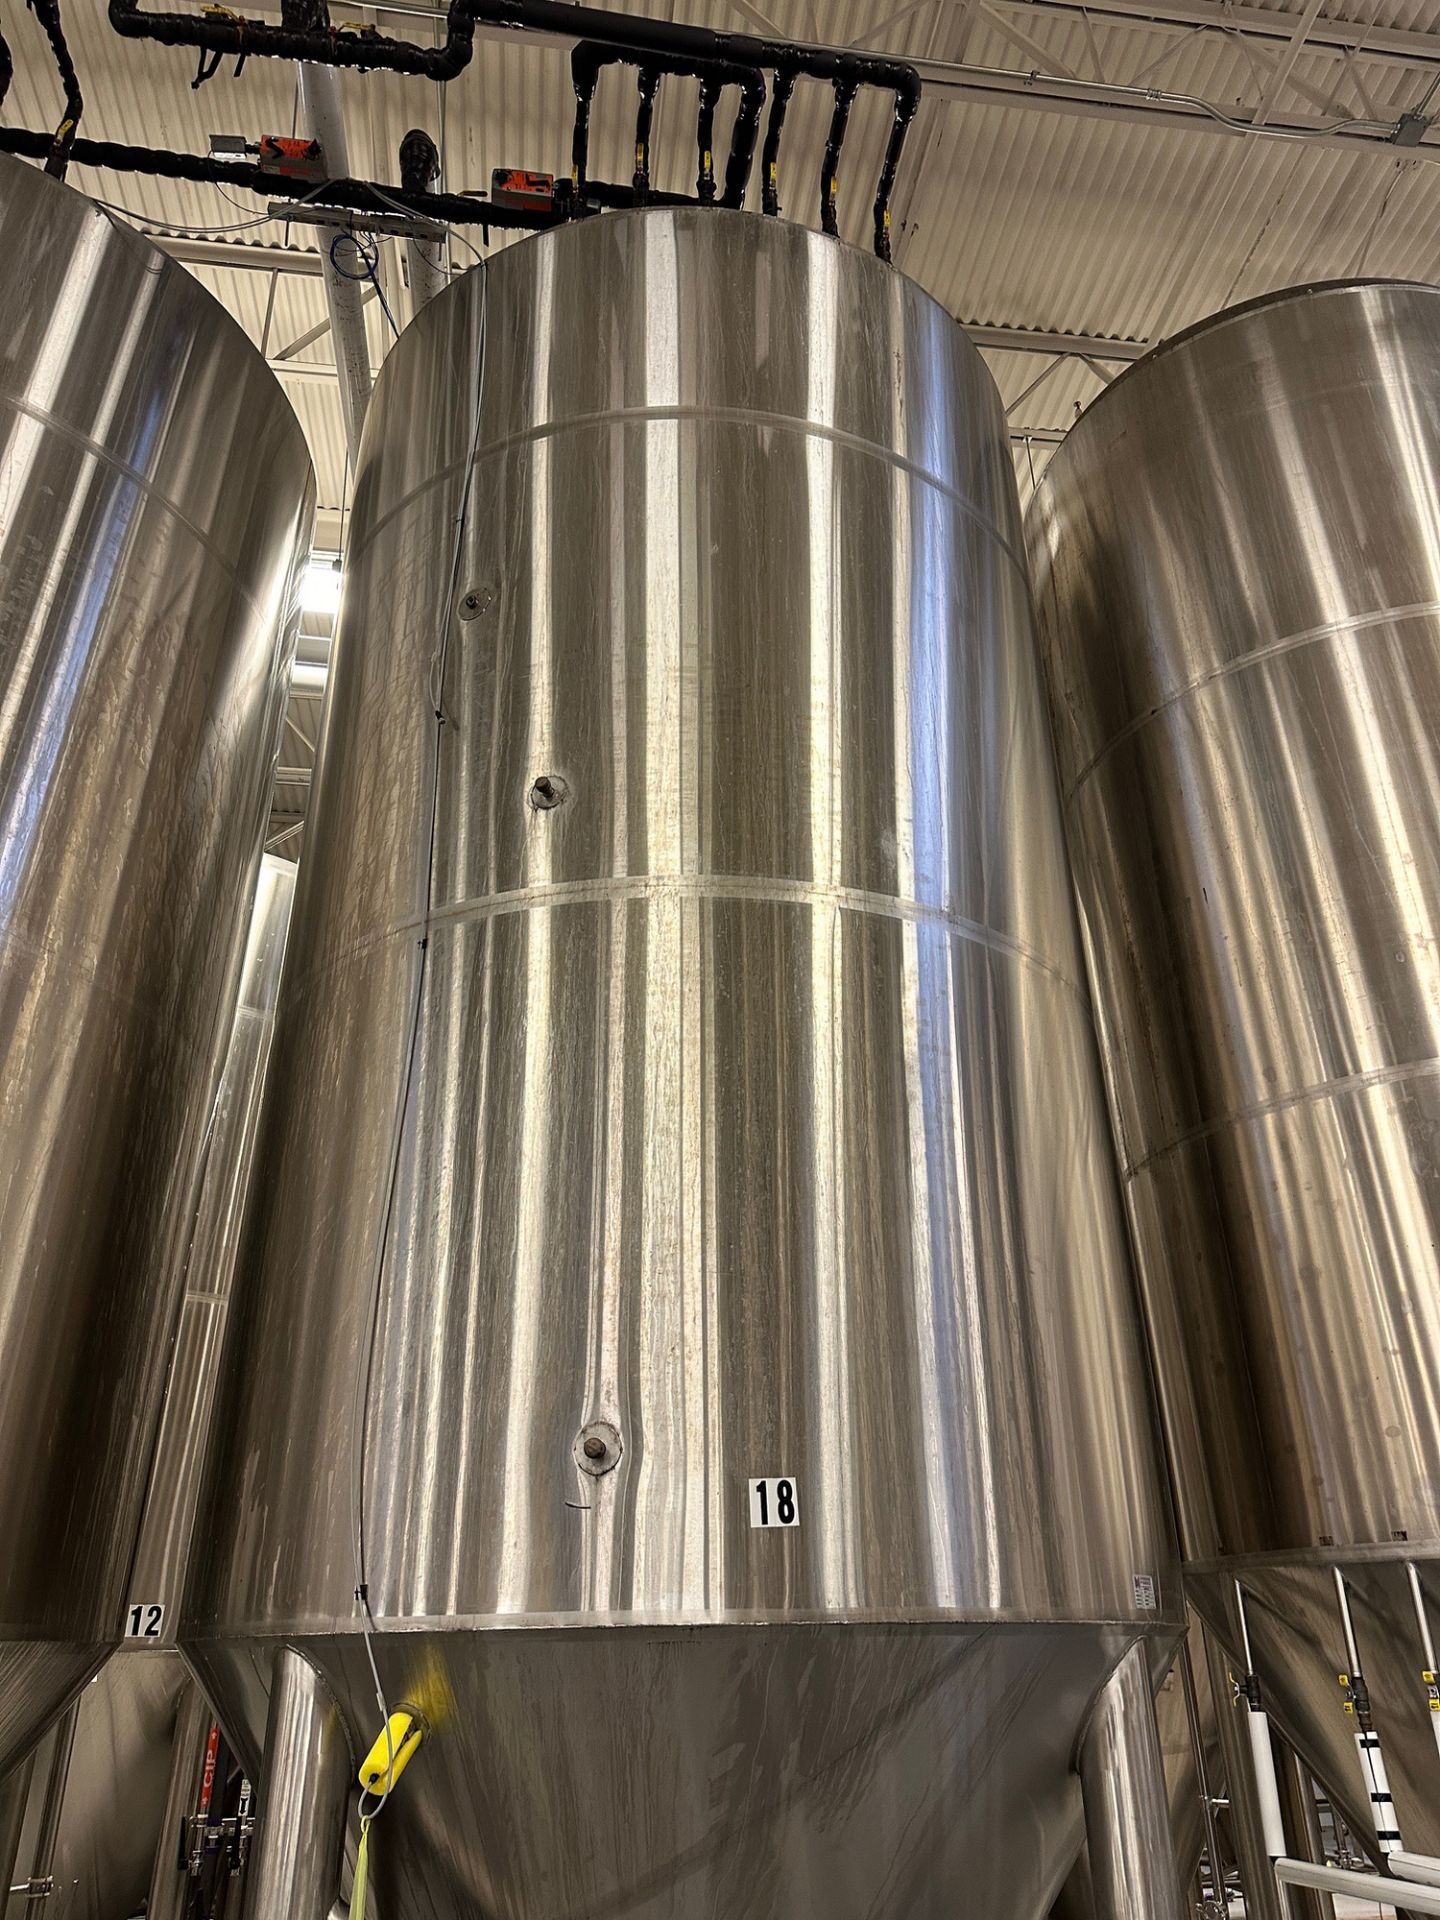 (1 of 8) 2020 Marks 132 BBL FV / 175 BBL or 5,400 Gal Max Capacity Jacketed Stainless Steel Ferm - Image 2 of 3